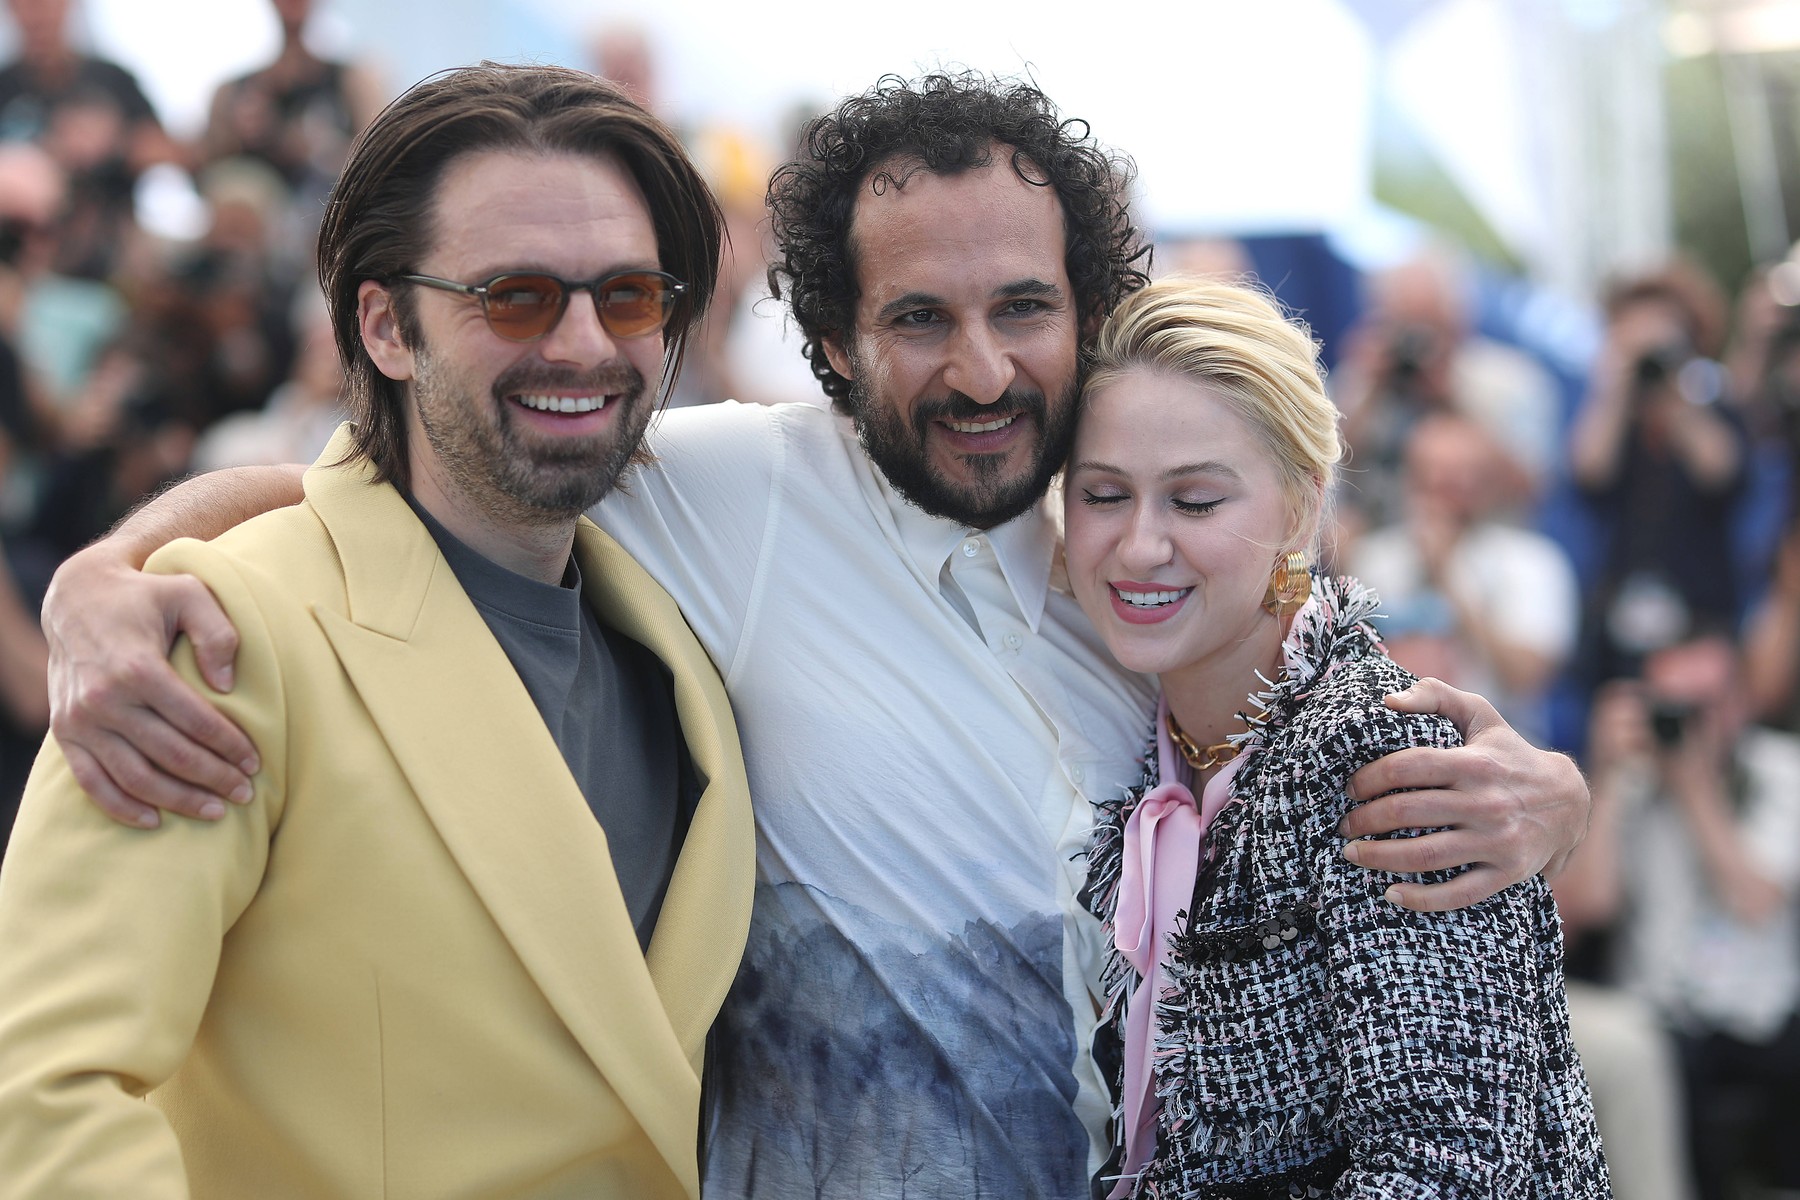 Sebastian Stan , Ali Abbasi and Maria Bakalova attend "The Apprentice" Photocall at the 77th annual Cannes Film Festival at Palais des Festivals on May 21, 2024 in Cannes, France.//03PARIENTE_15070029/Credit:JP PARIENTE/SIPA/2405211518,Image: 875129474, License: Rights-managed, Restrictions: , Model Release: no, Credit line: JP PARIENTE / Sipa Press / Profimedia